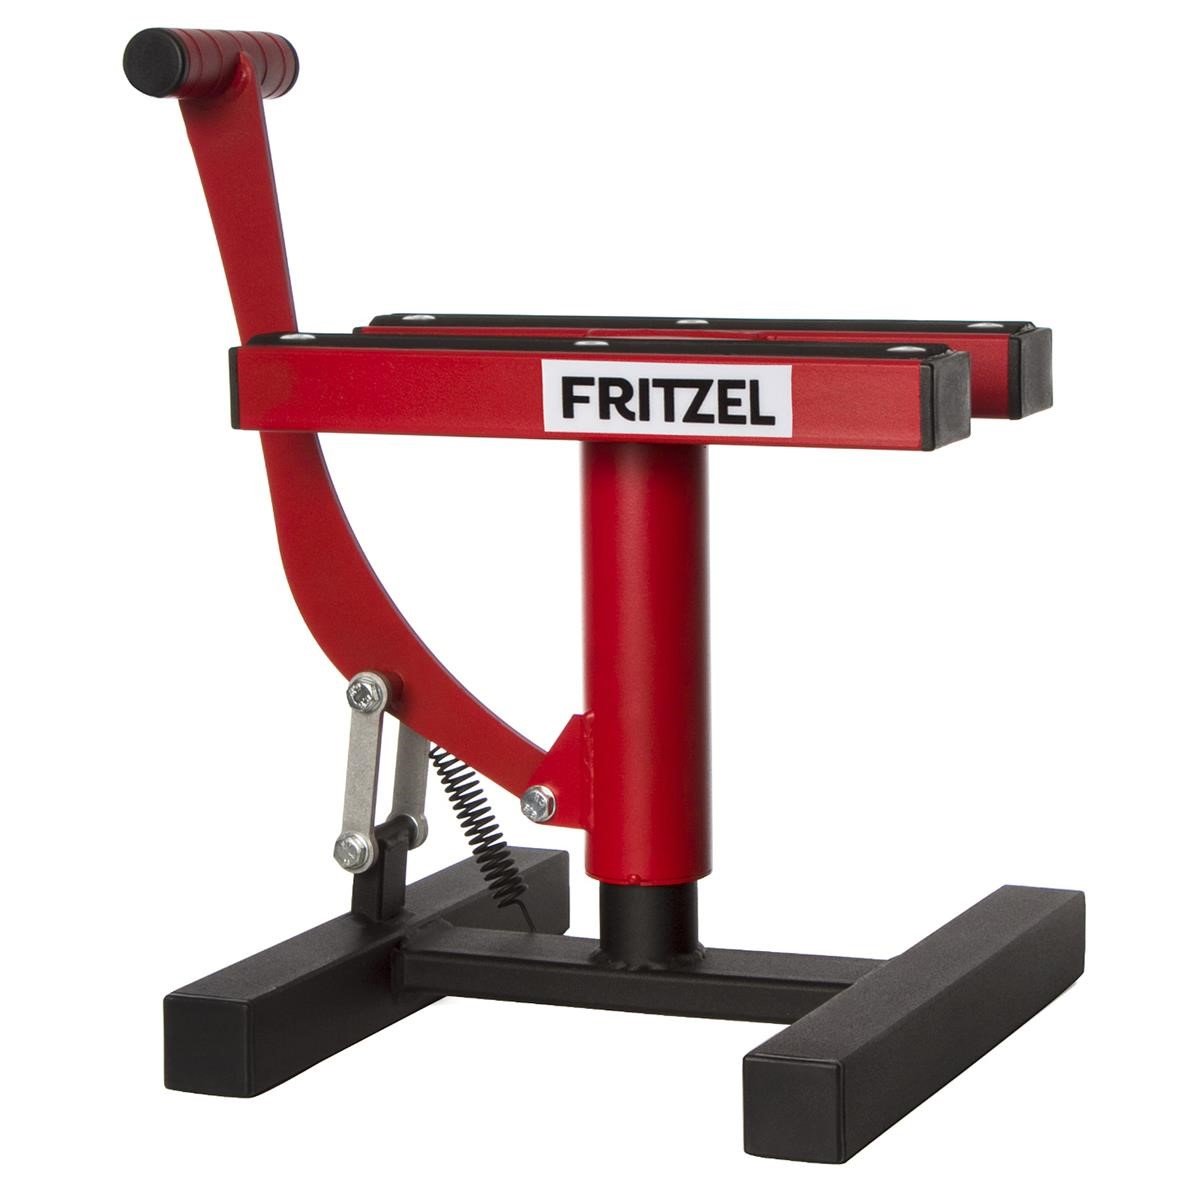 FRITZEL Motorcycle Lift Stand Kleiner Thron Motocross / 290-410 mm, Red